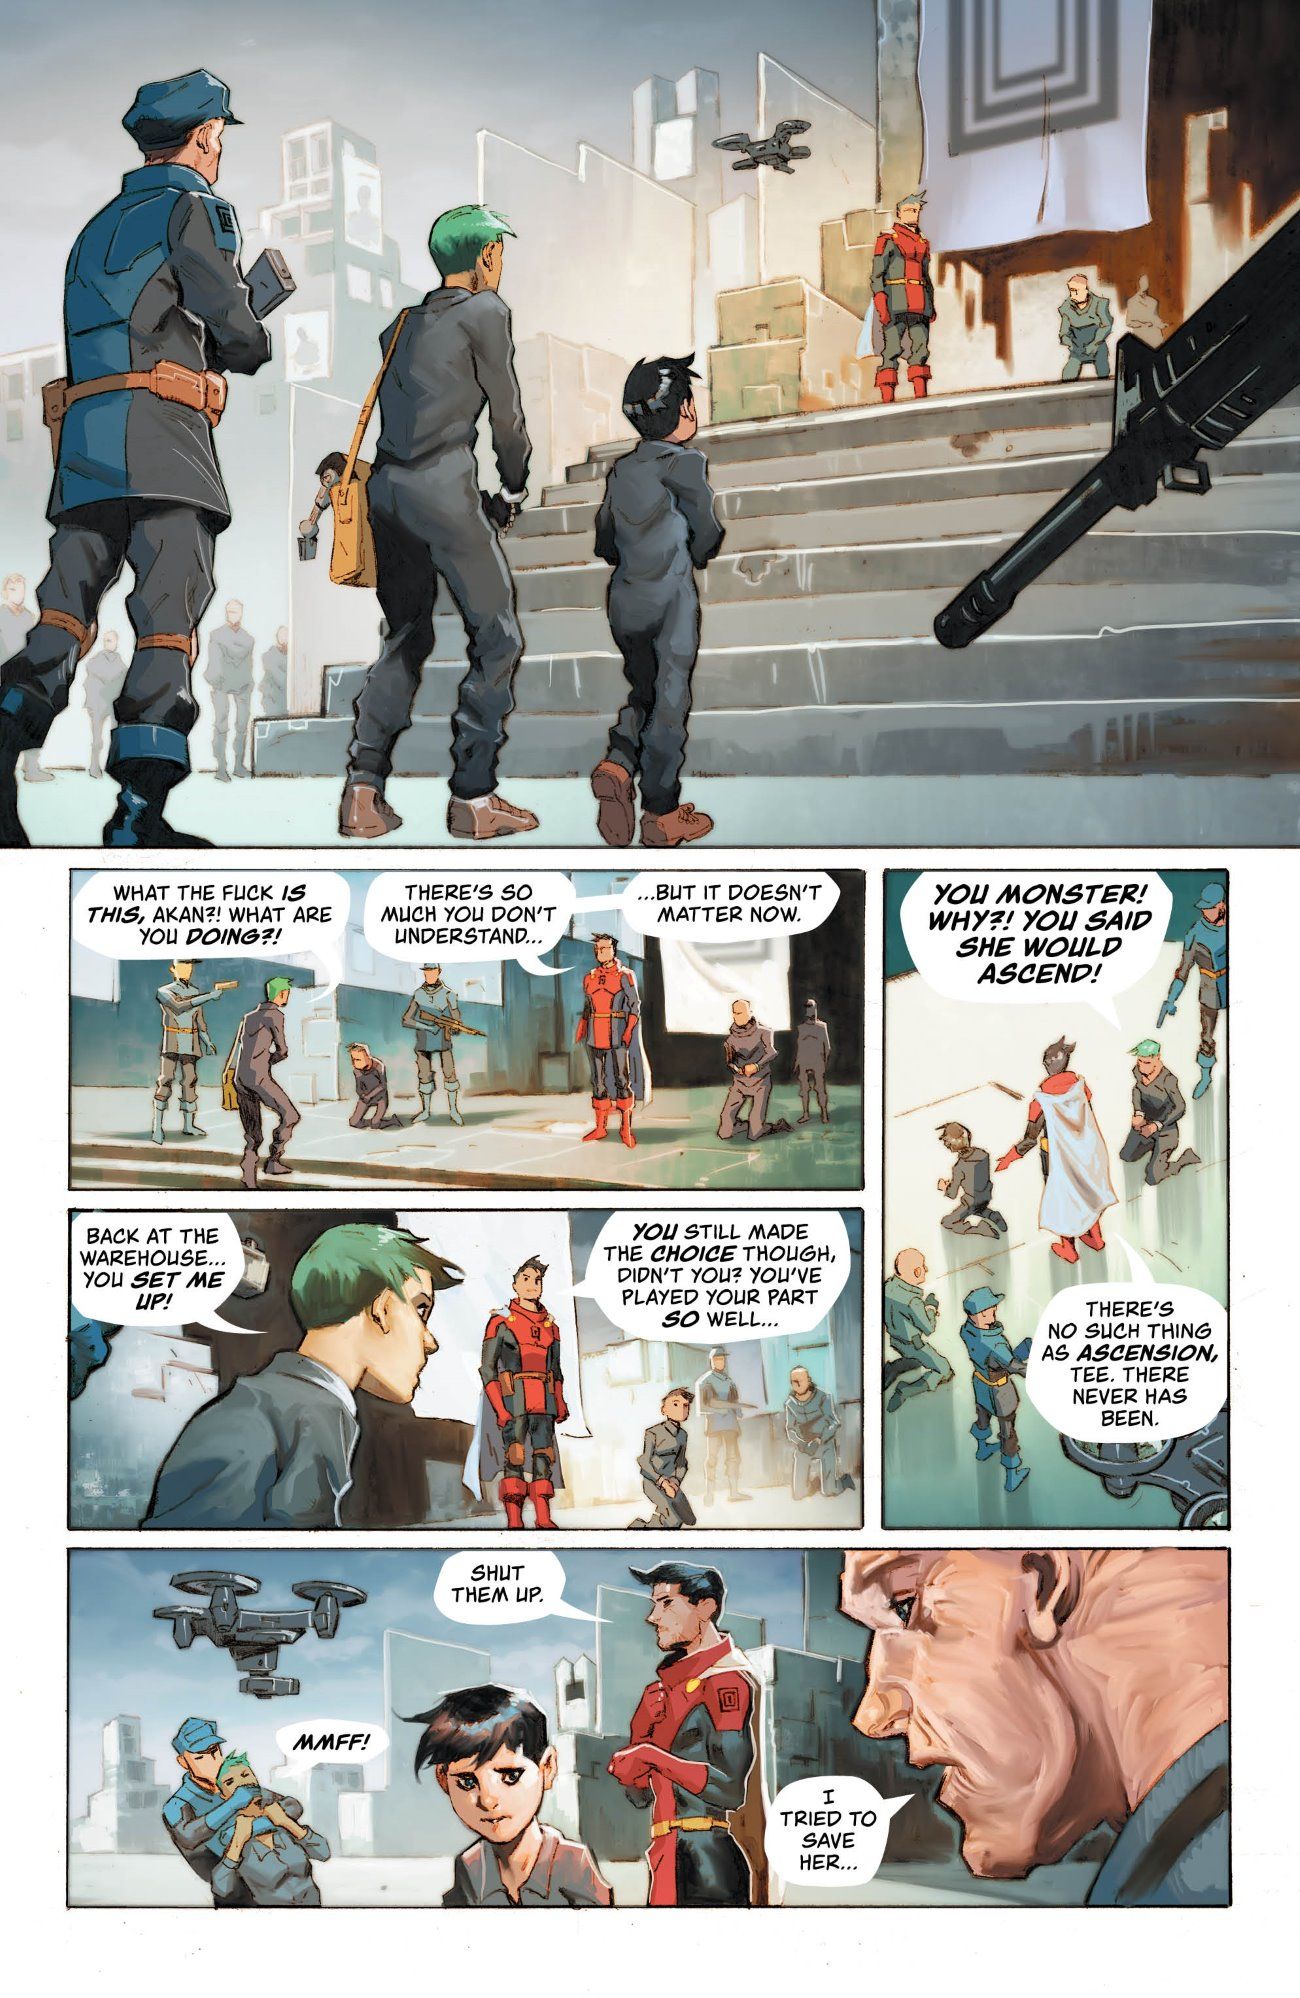 High Level 6 Comic Preview 3